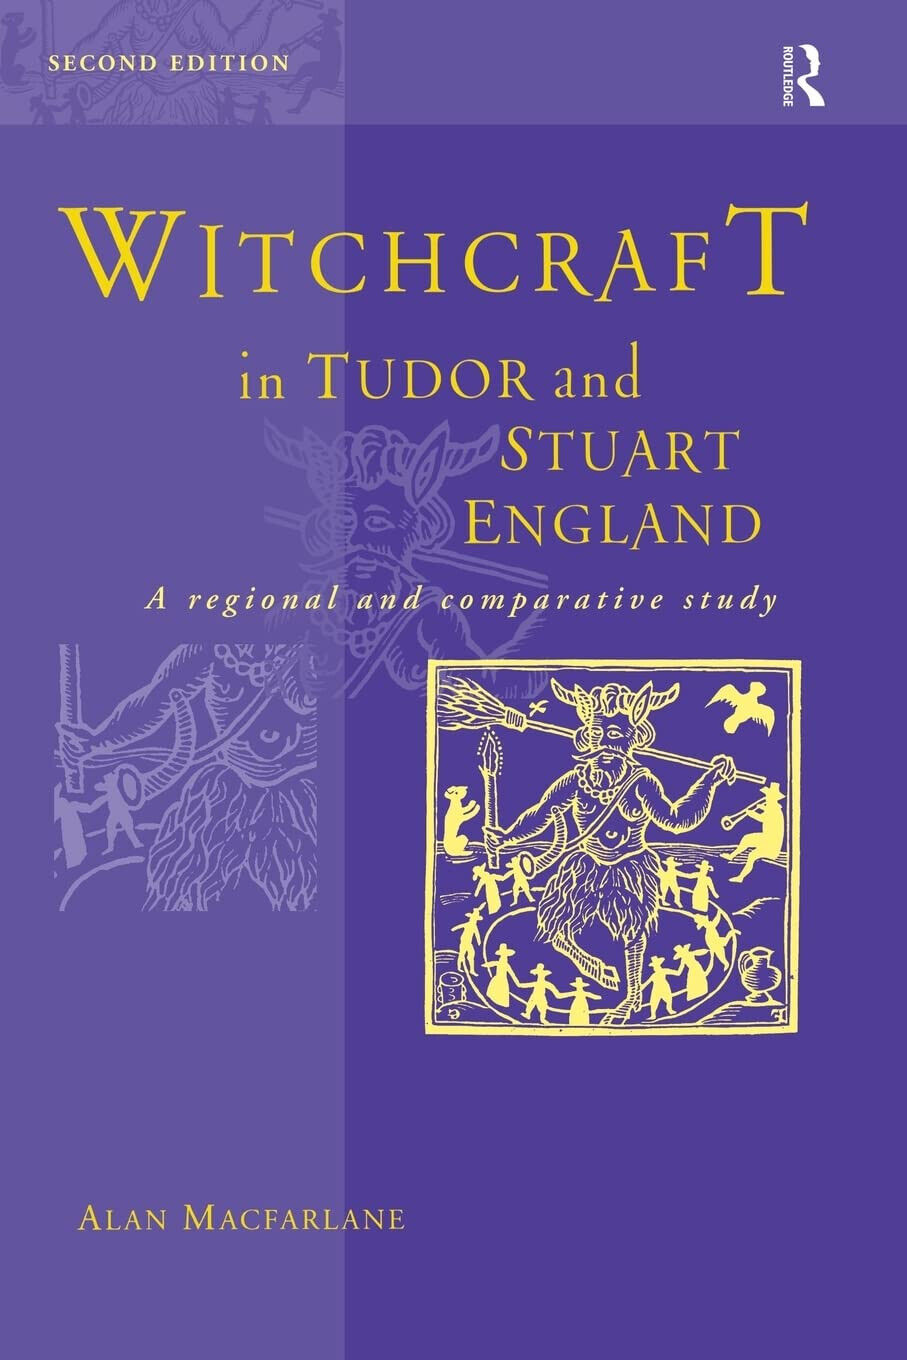 Witchcraft in Tudor and Stuart England - Alan Macfarlane - Routledge, 1999